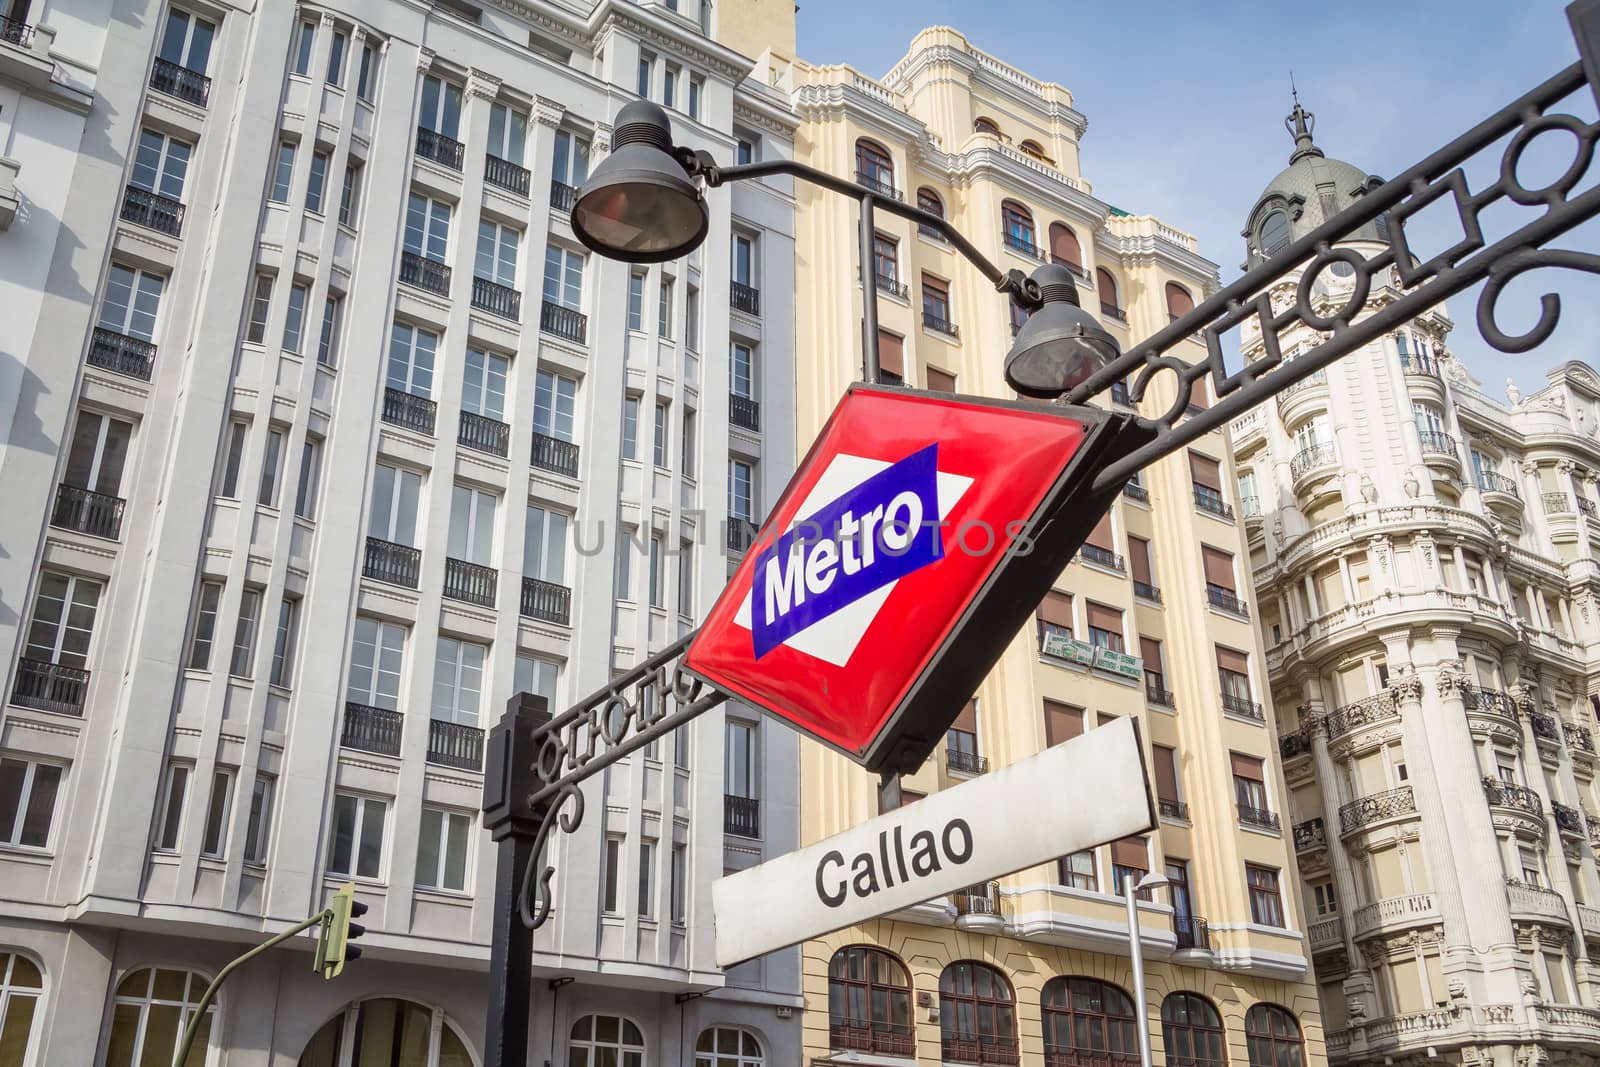 Callao metro sign over city background in Madrid, Spain